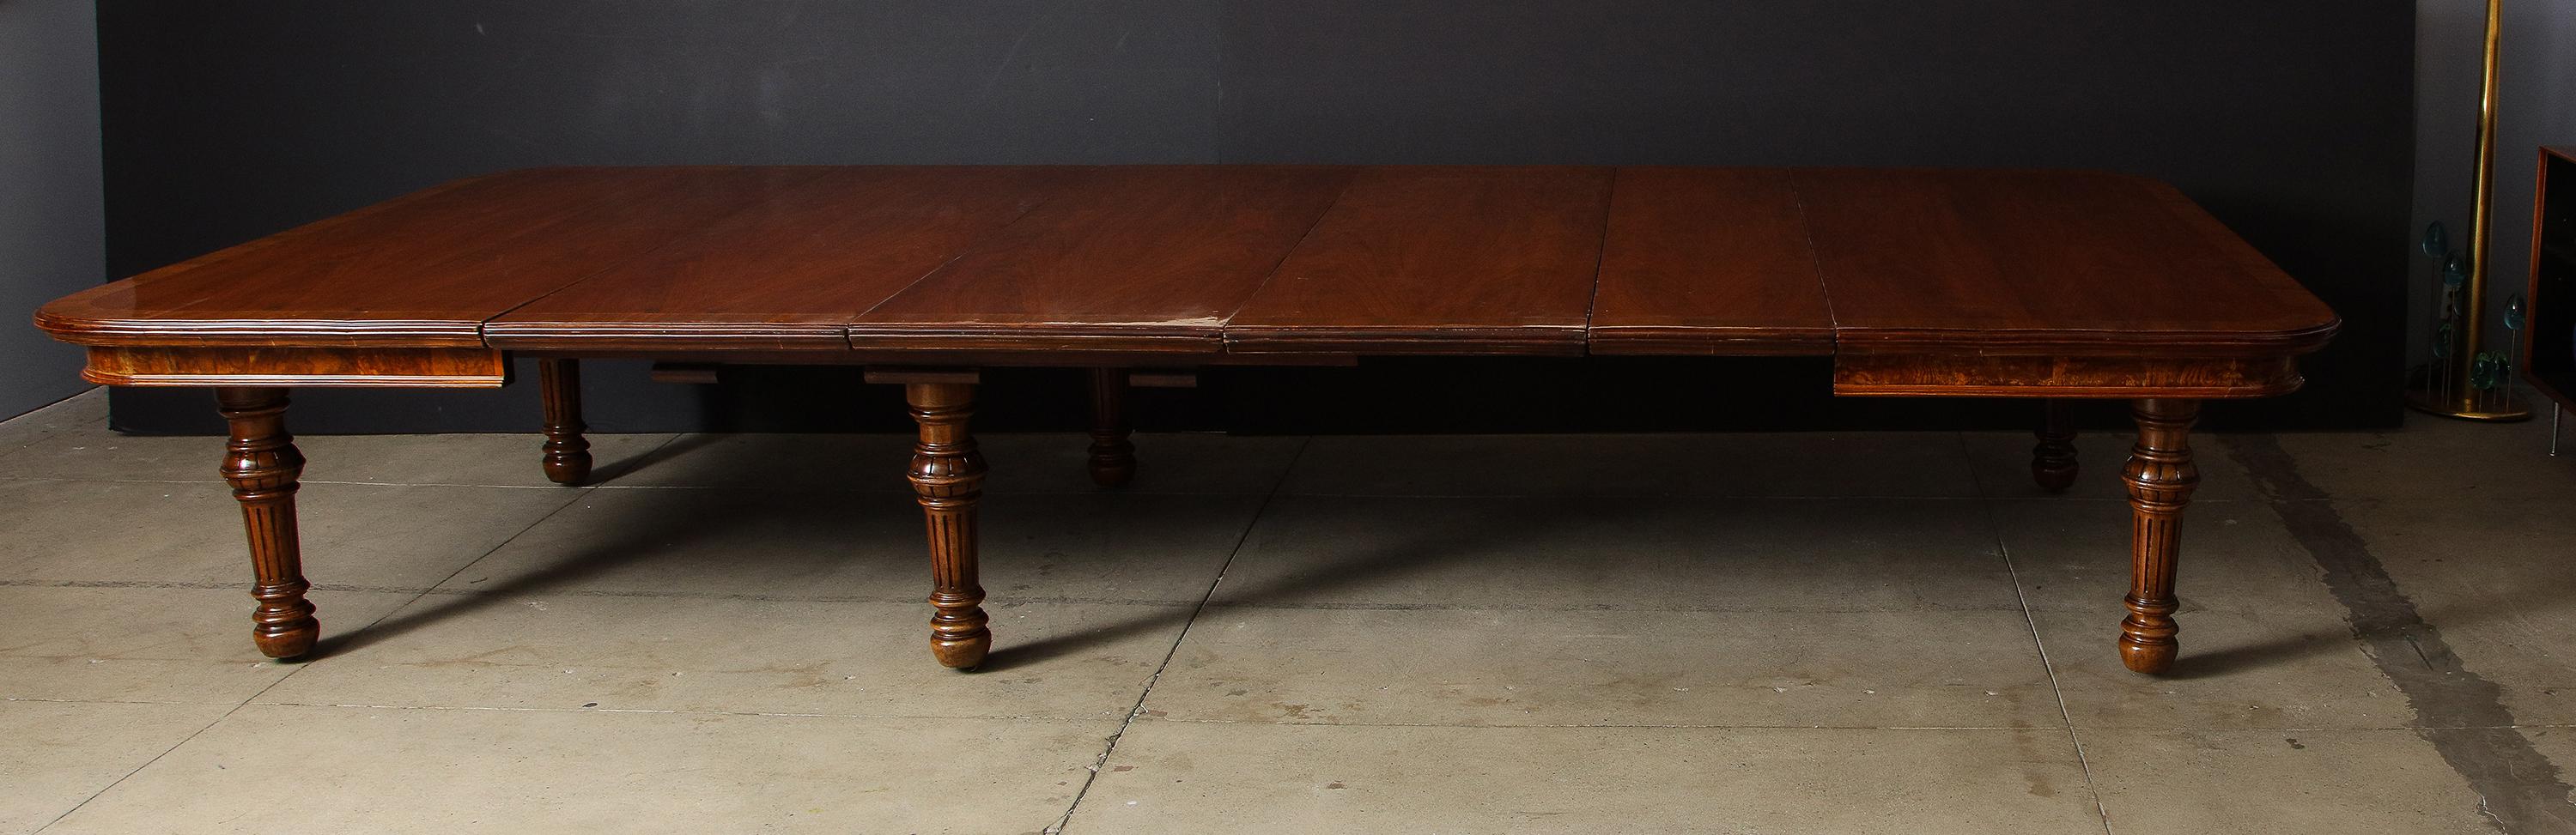 Inlay Large Scale Dining Table by Gillows